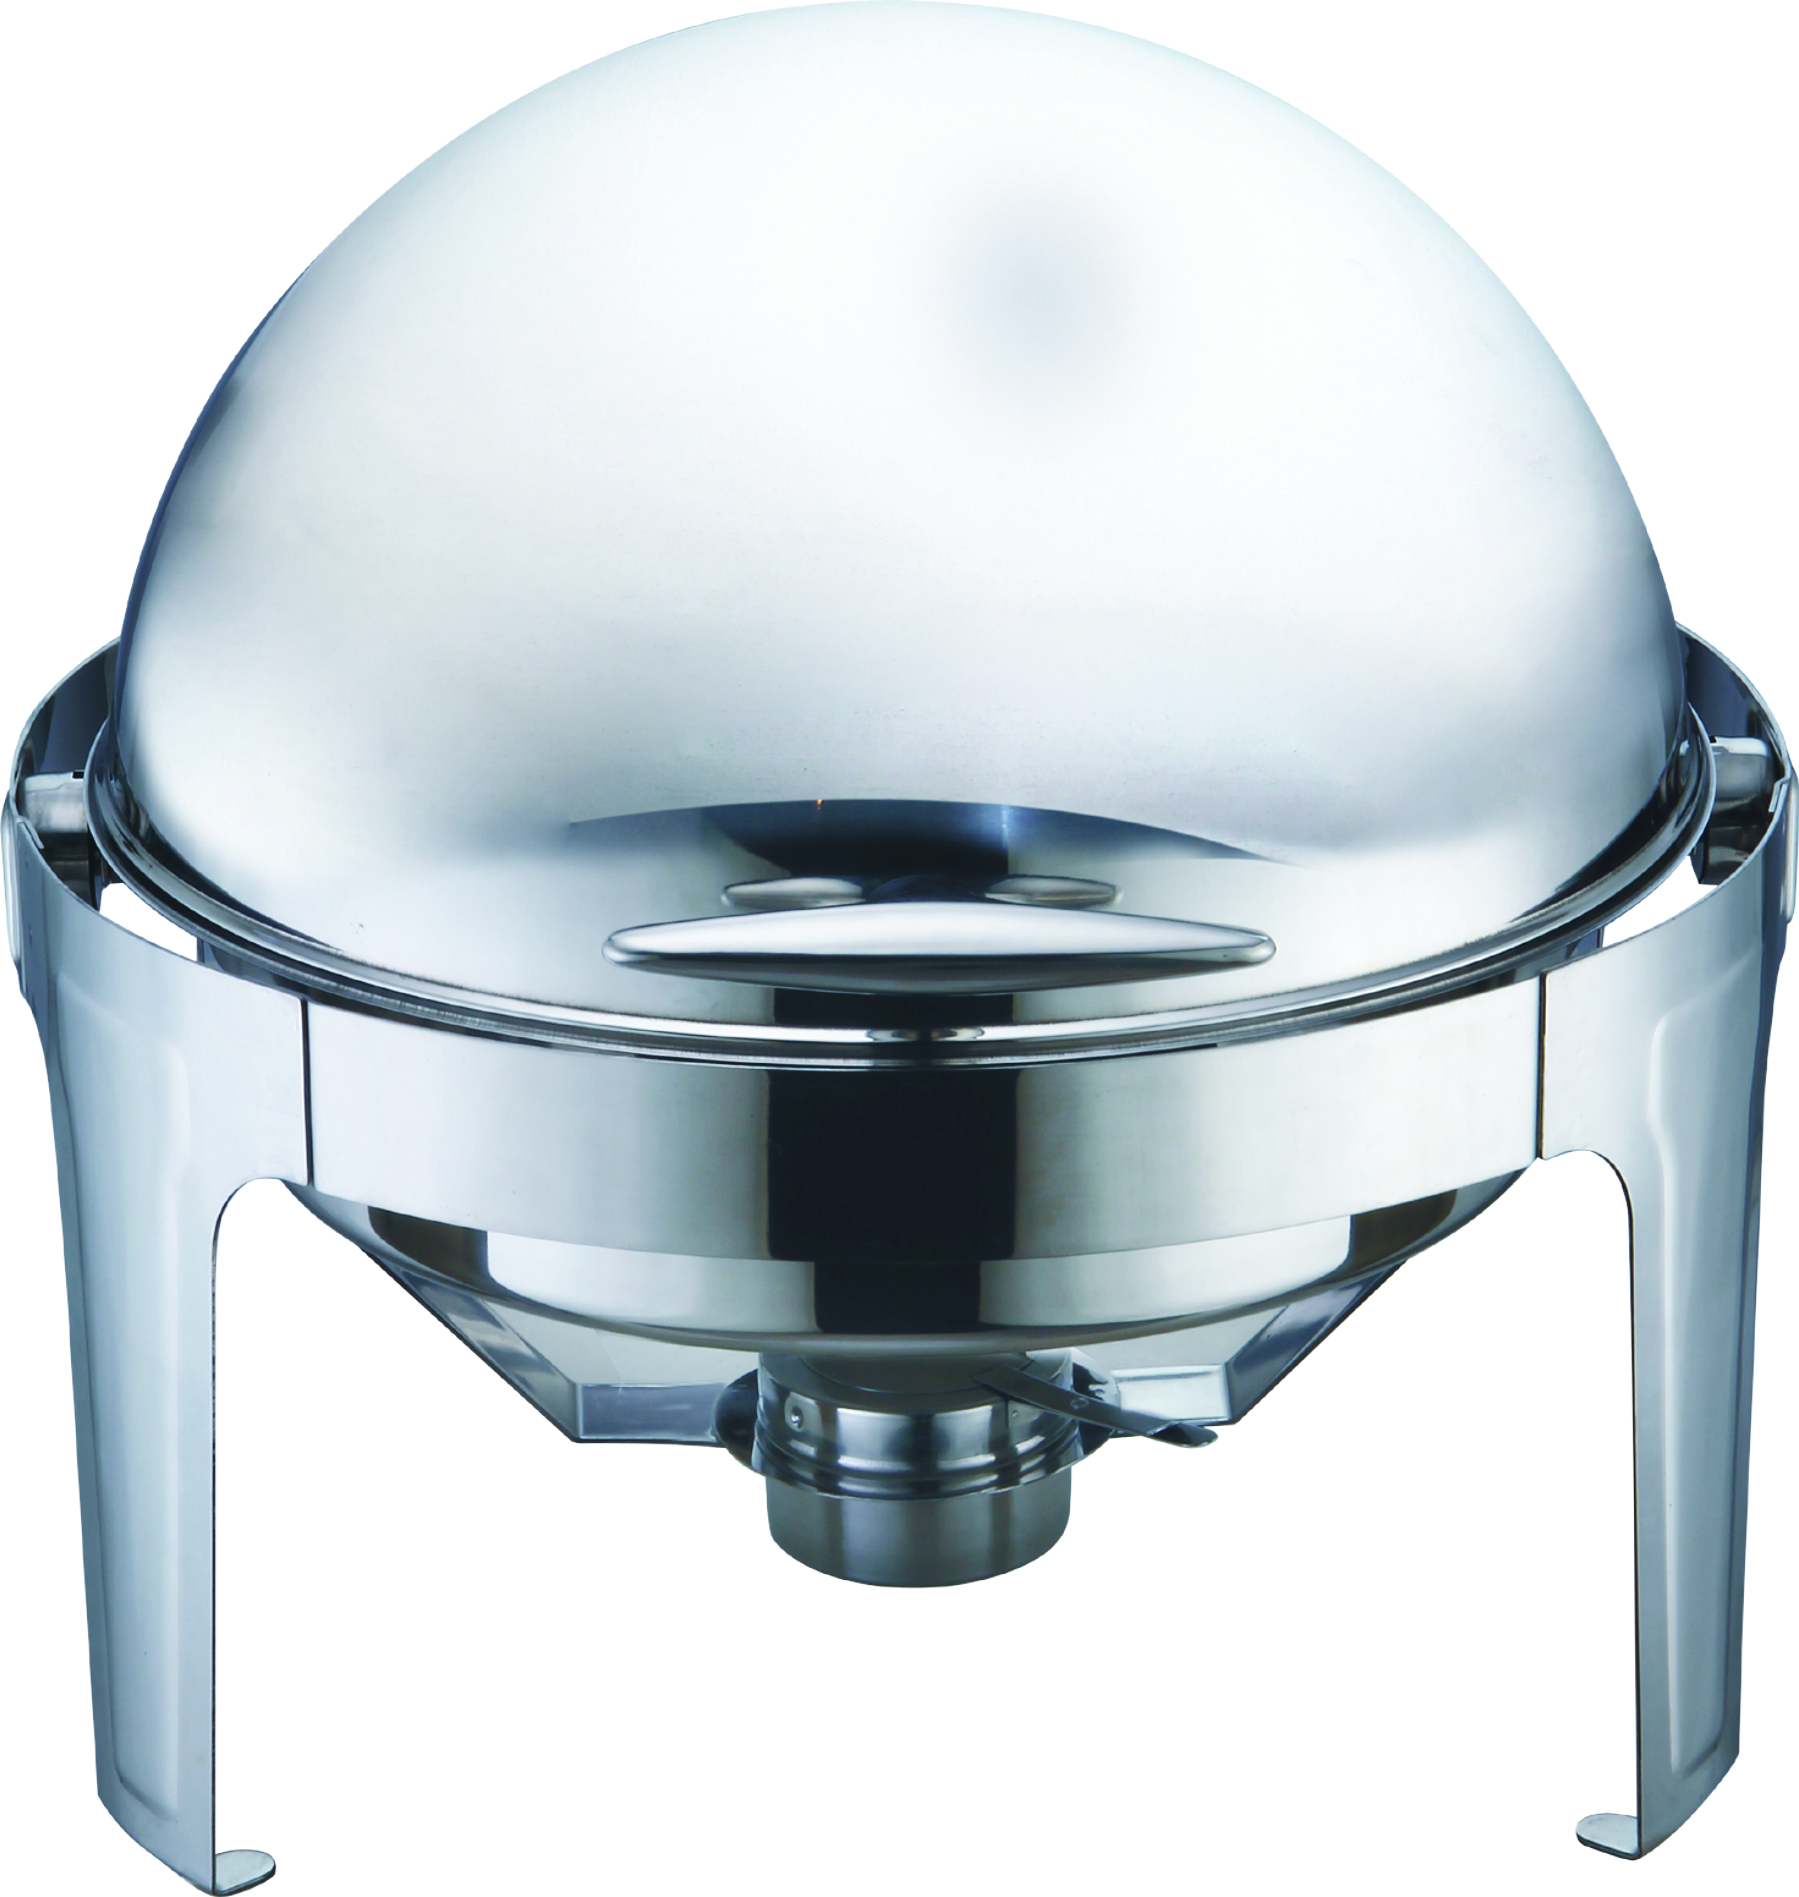 GRT-721KD Stainless Steel Stackbale Round Chafing Dish 6L 